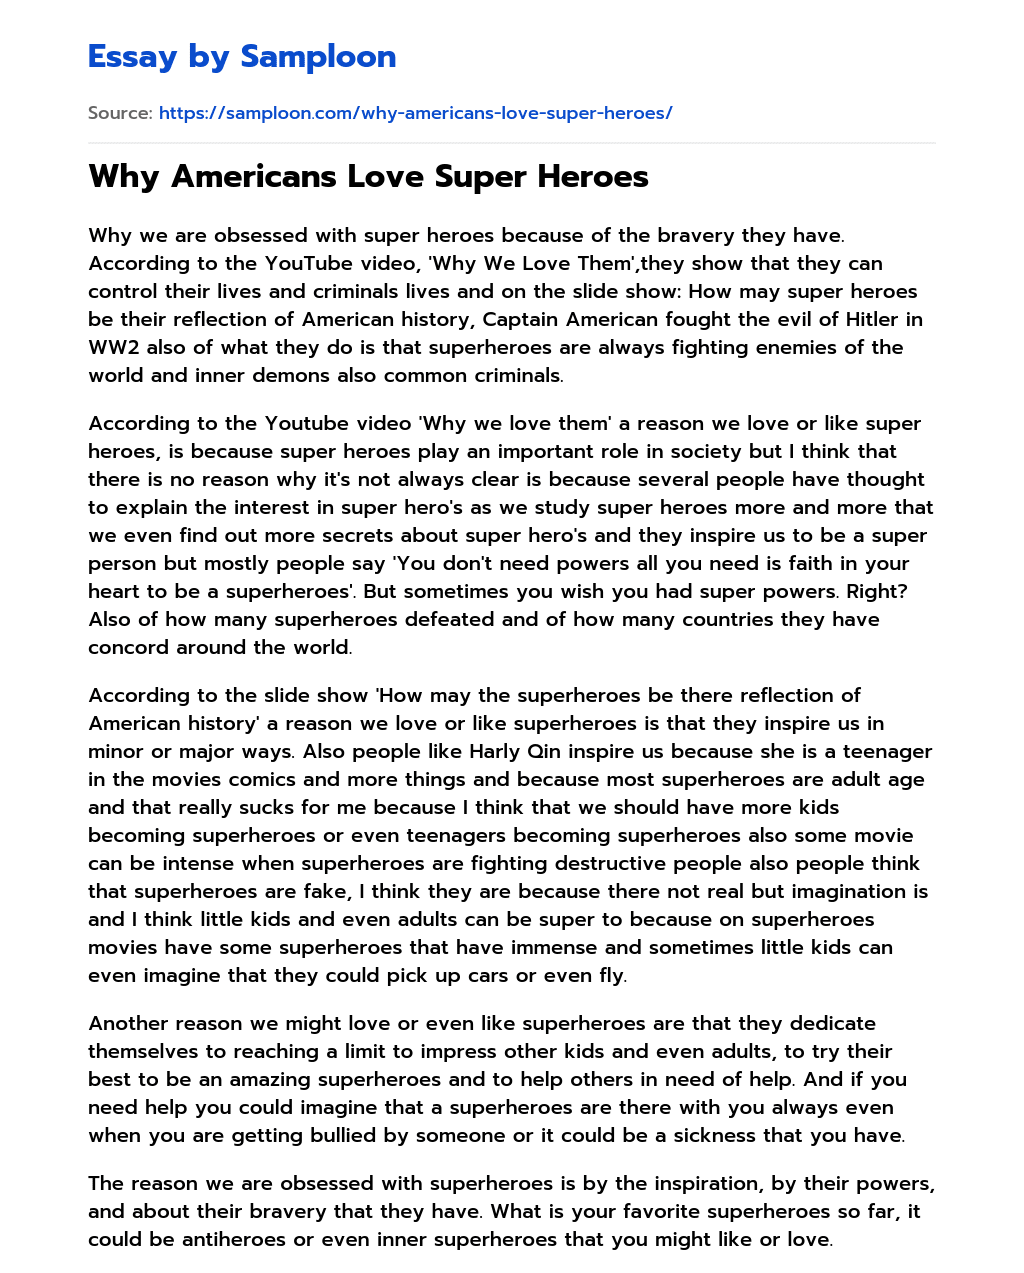 Why Americans Love Super Heroes essay